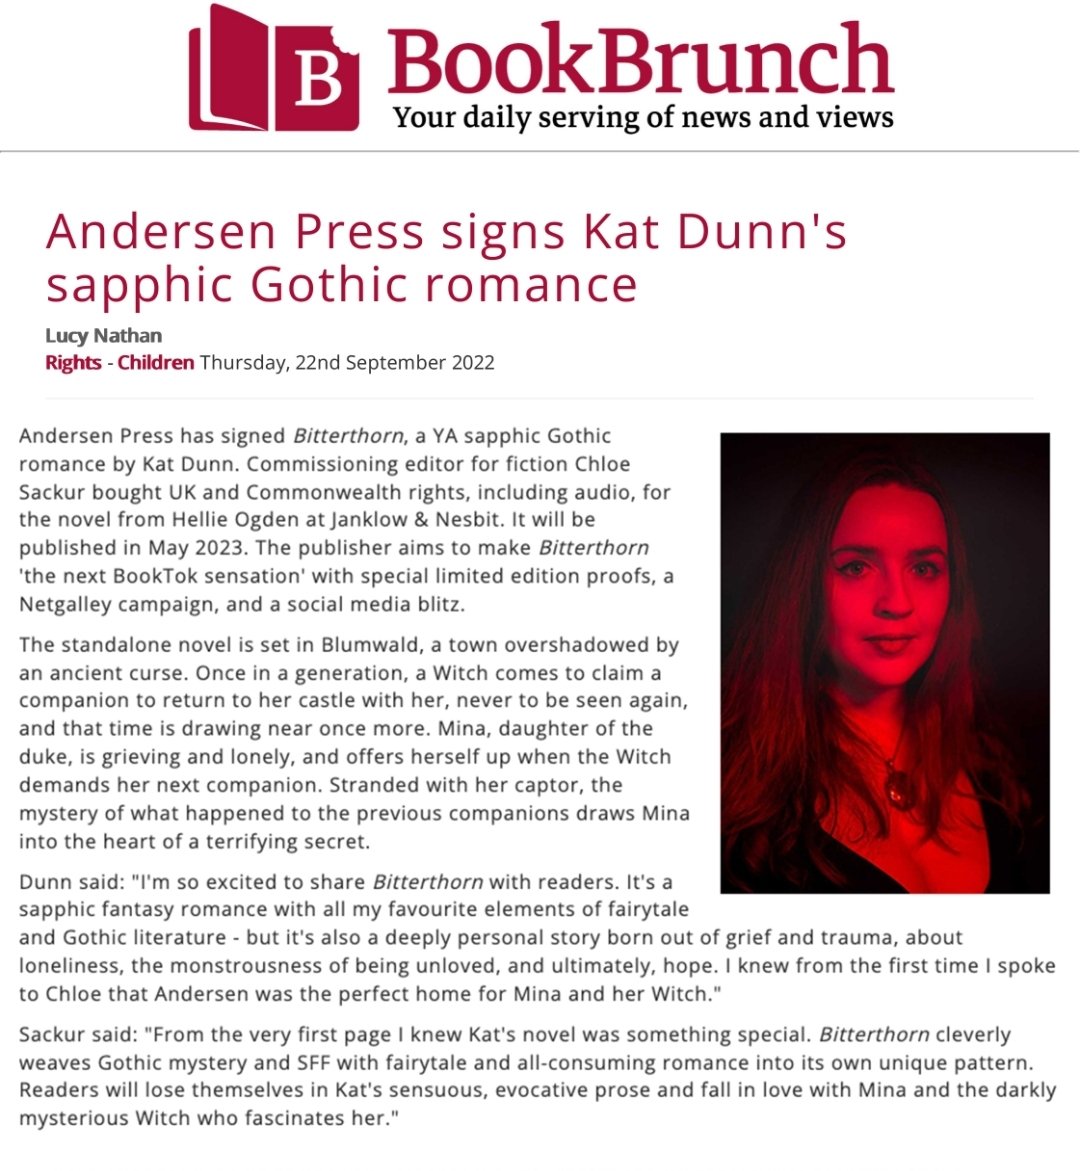 🕯️SHE IS HERE🕯️ thrilled to announce BITTERTHORN will be published by @AndersenPress May 2023🕯️🍂 a sapphic Gothic romance that's uprooted x crimson peak, BITTERTHORN is about the monsters loneliness makes of us & what we would do to be loved i cannot wait to share it with you